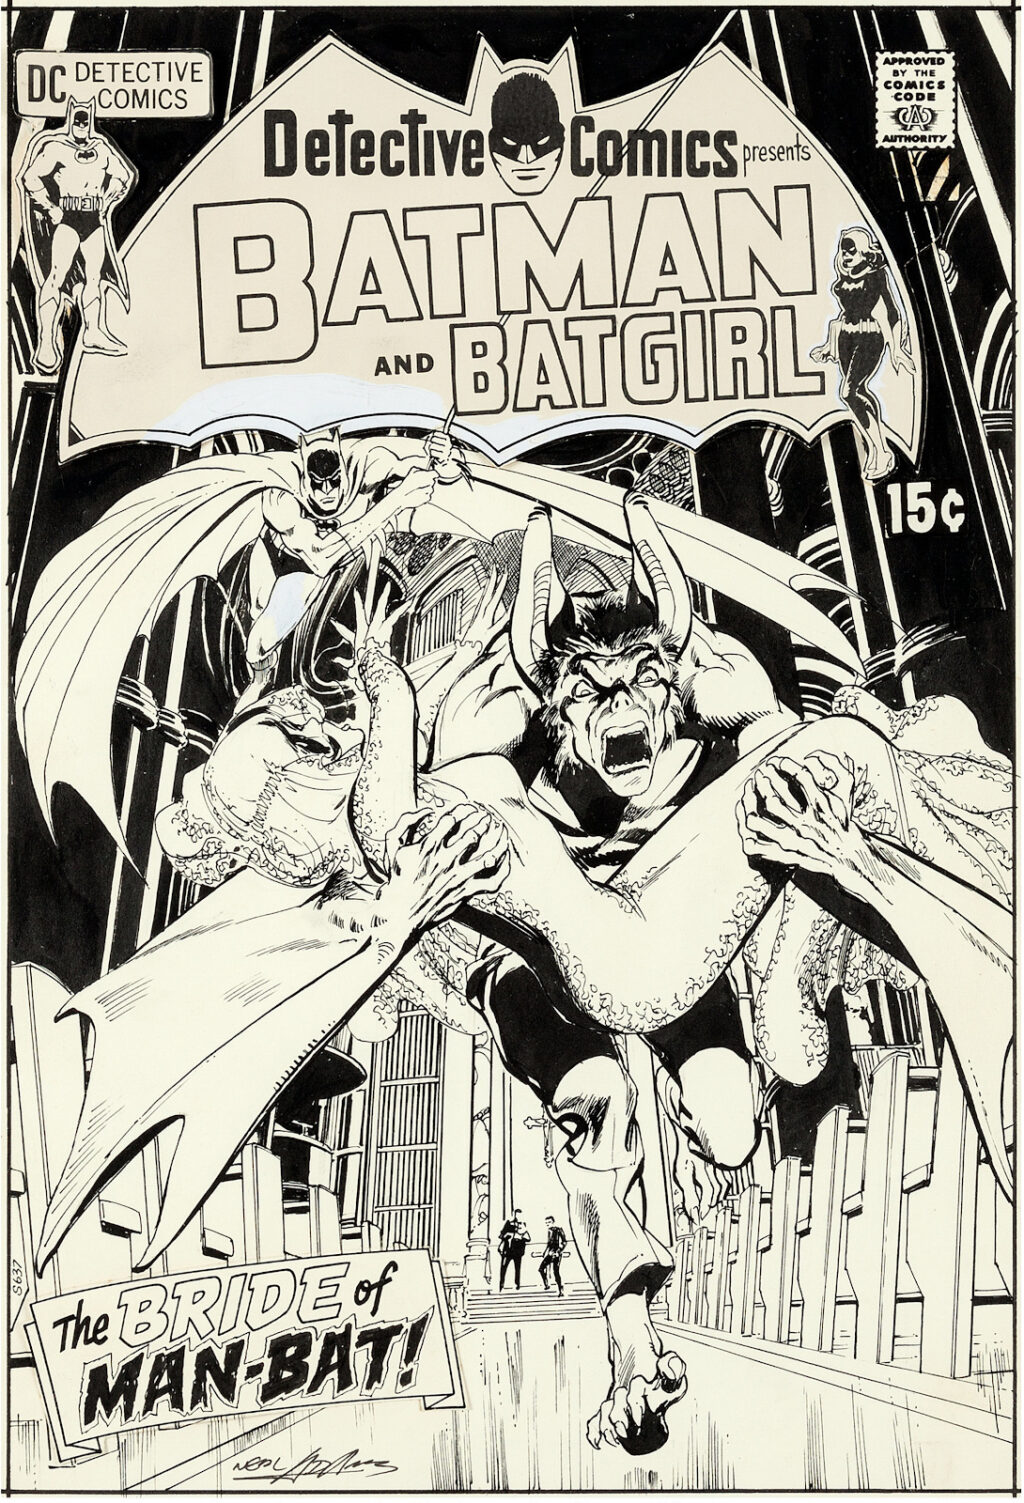 Detective Comics issue 407 cover by Neal Adams